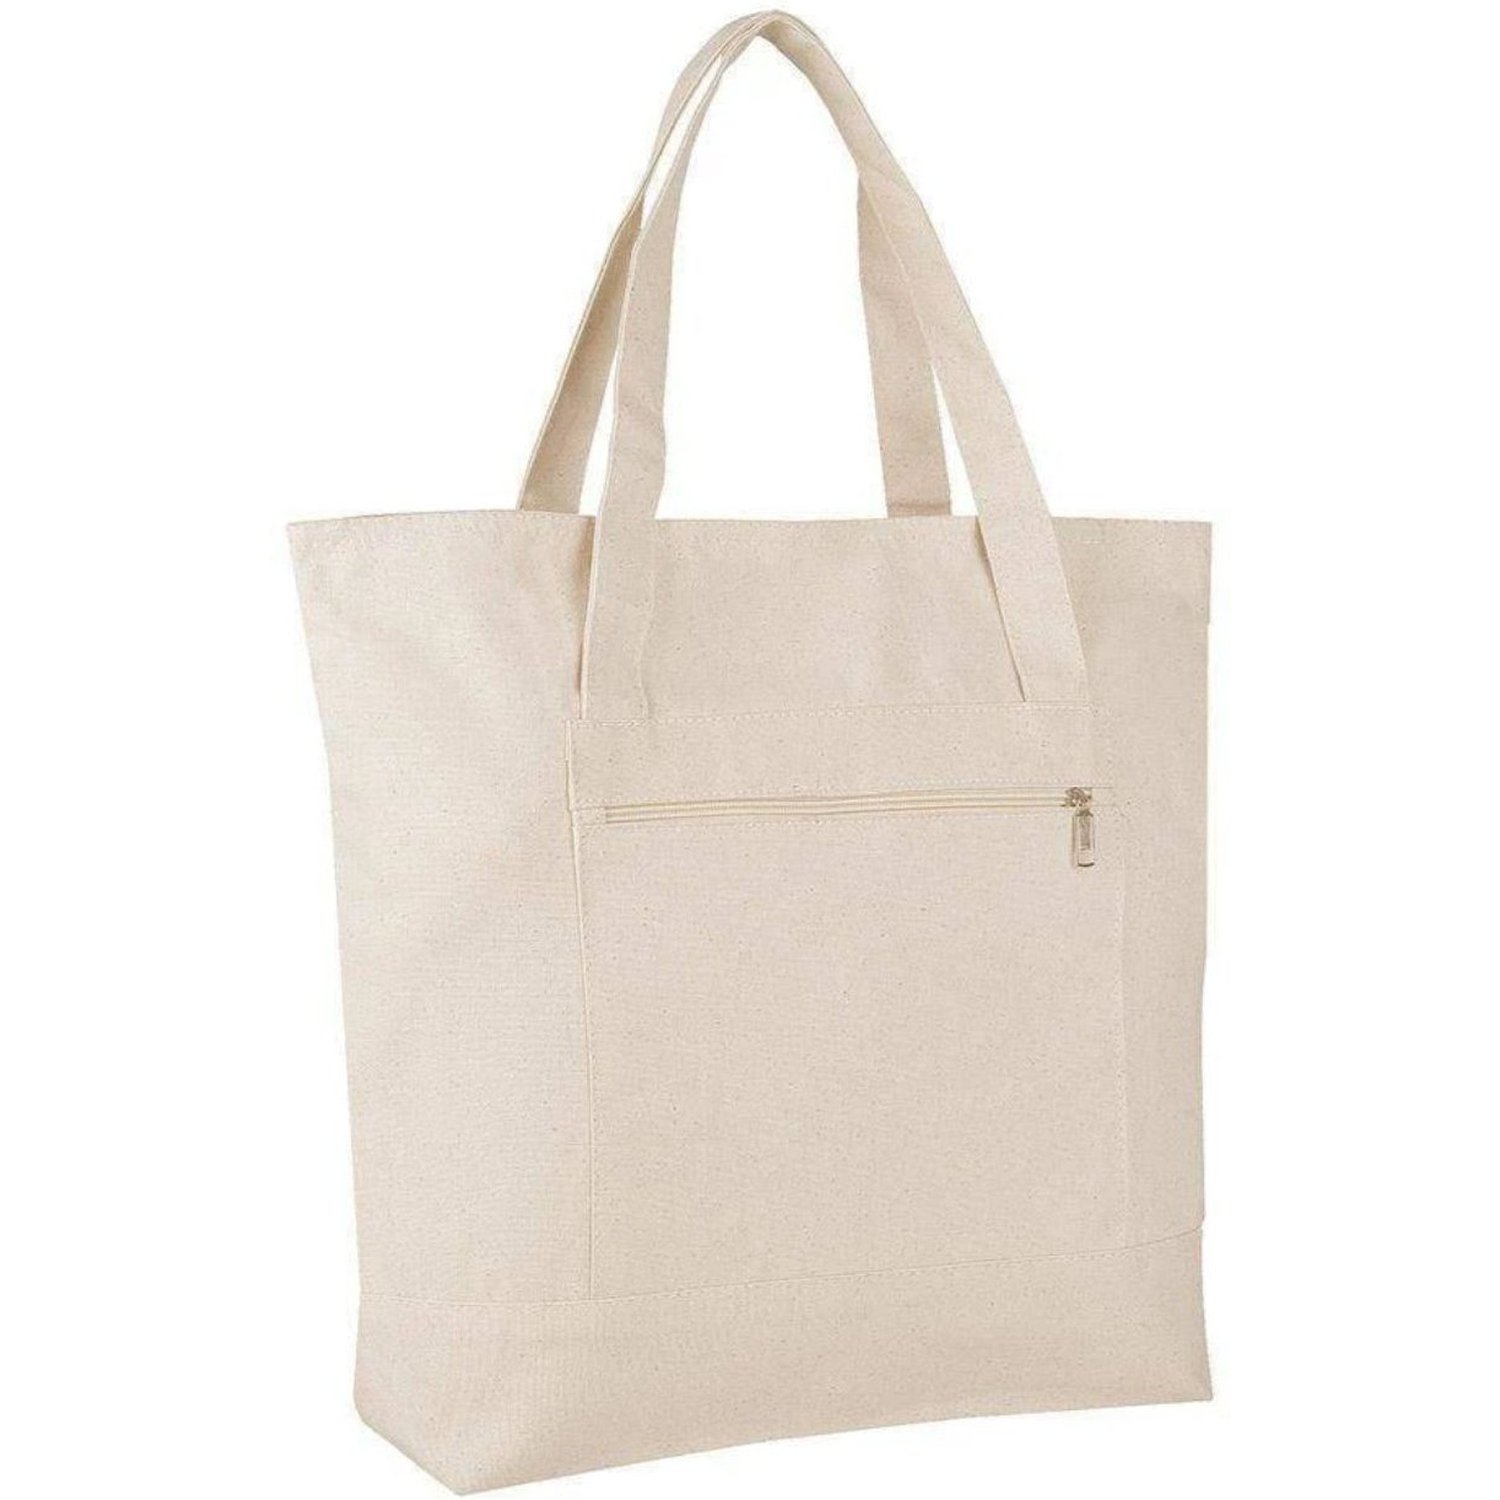 Heavy Canvas Zippered Shopping Tote Bags  Wholesale tote bags, Shopping  tote bag, Cheap tote bags